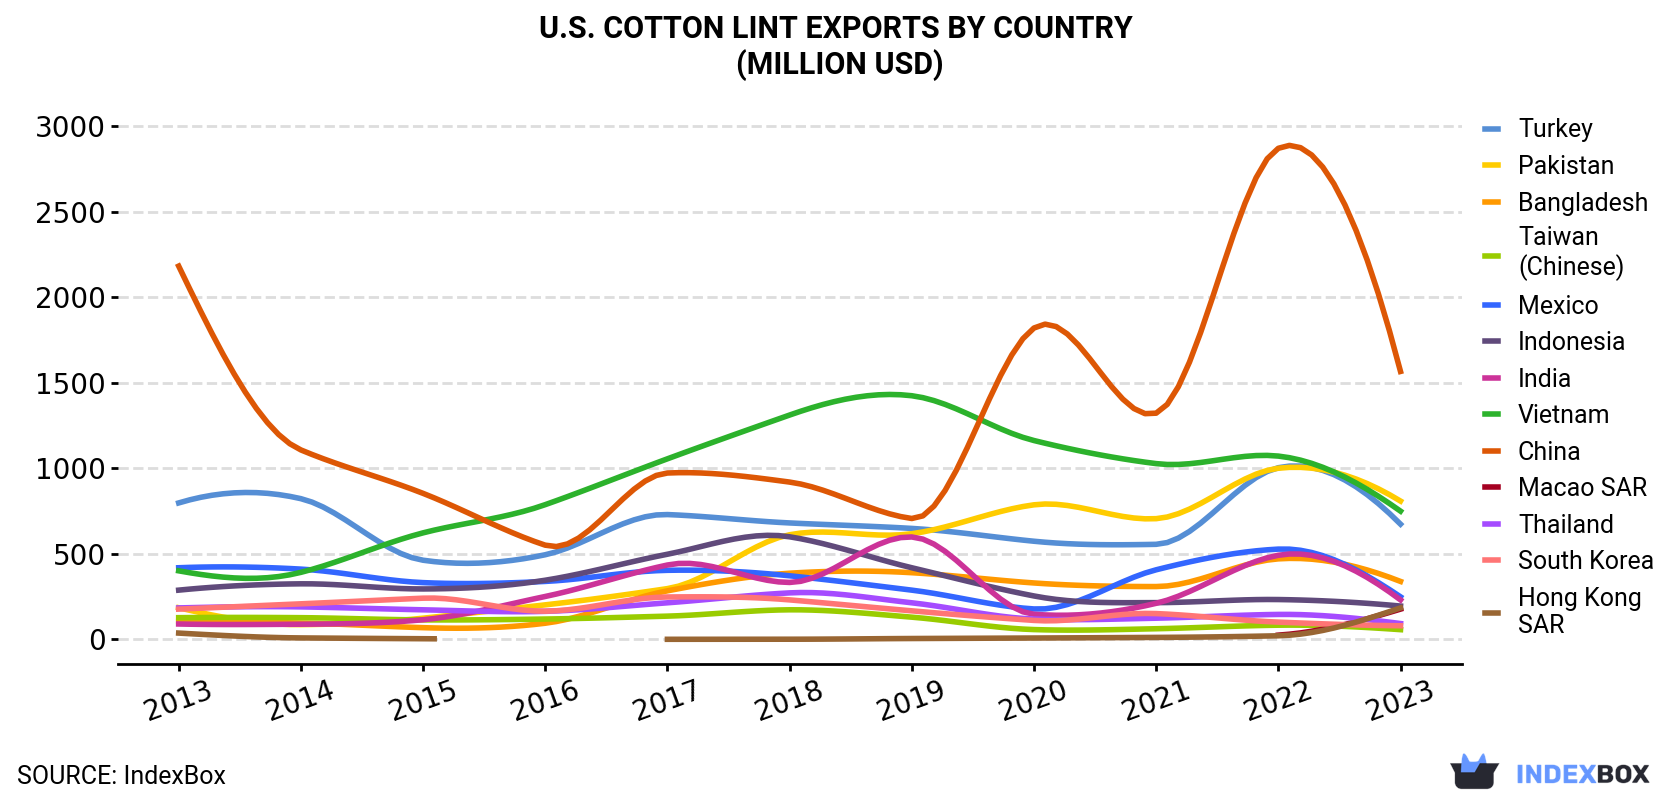 U.S. Cotton Lint Exports By Country (Million USD)